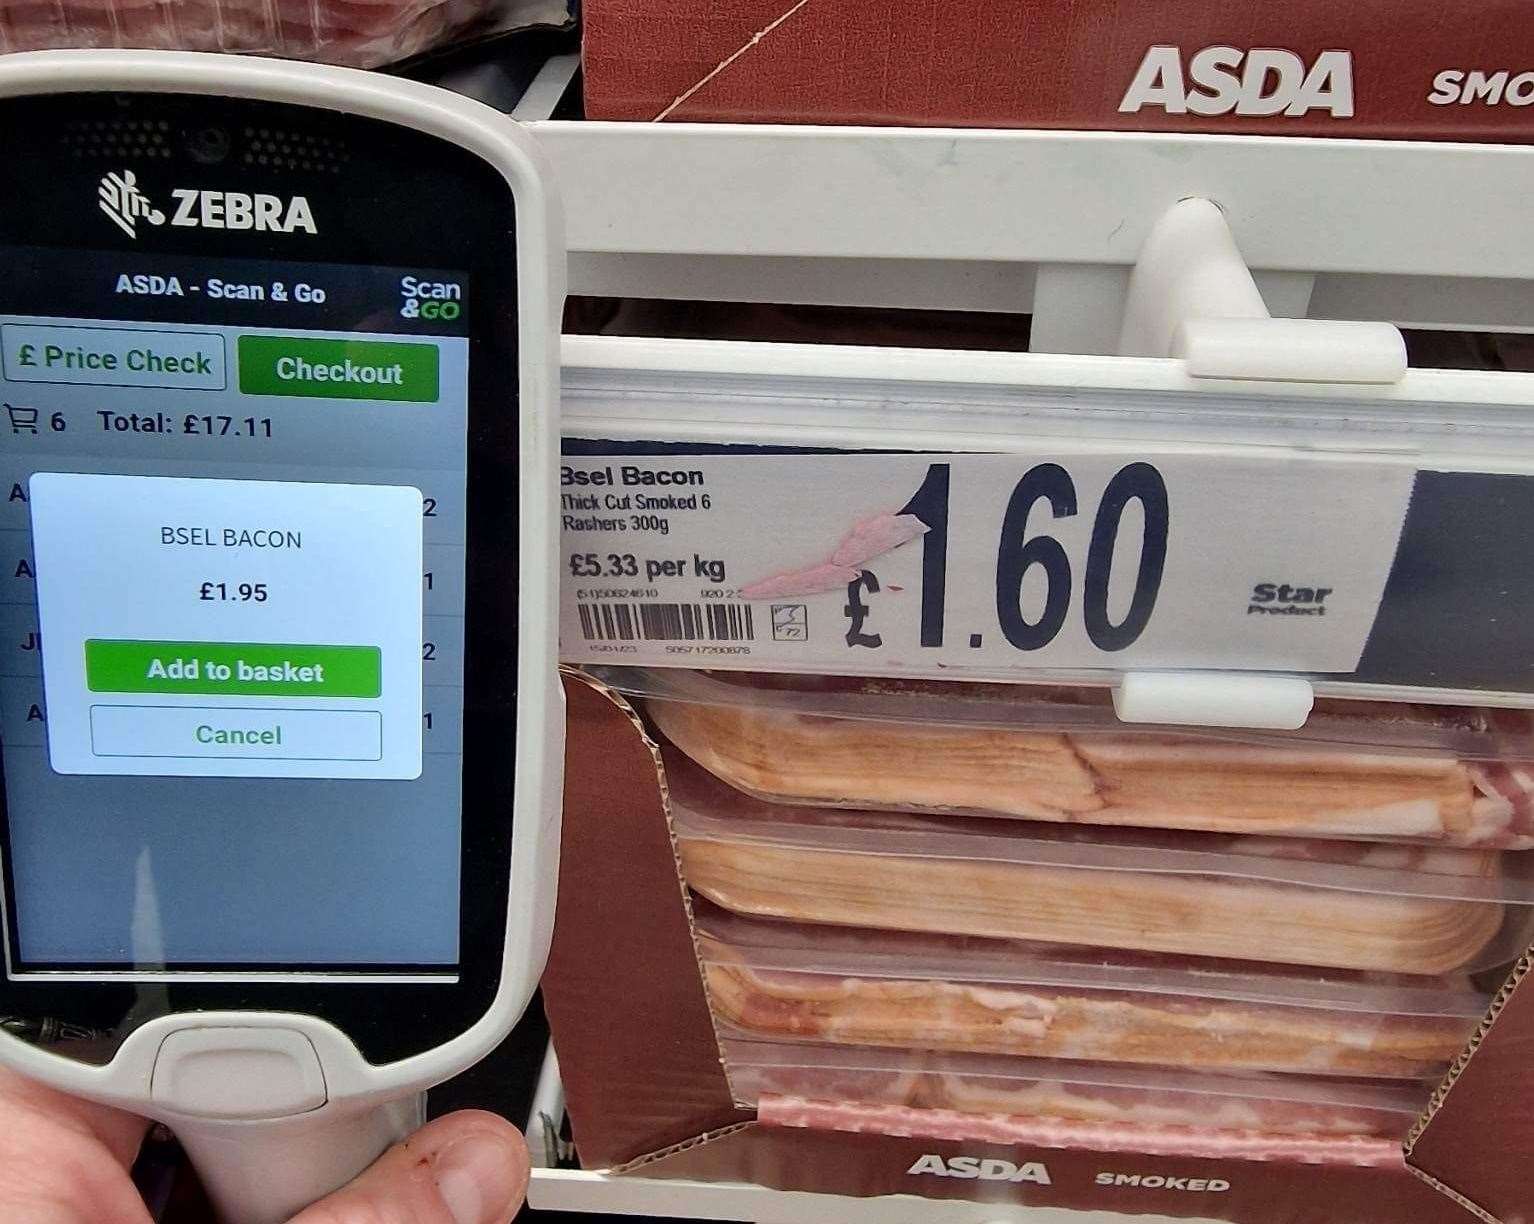 Bacon was coming up as £1.95 on the scanner